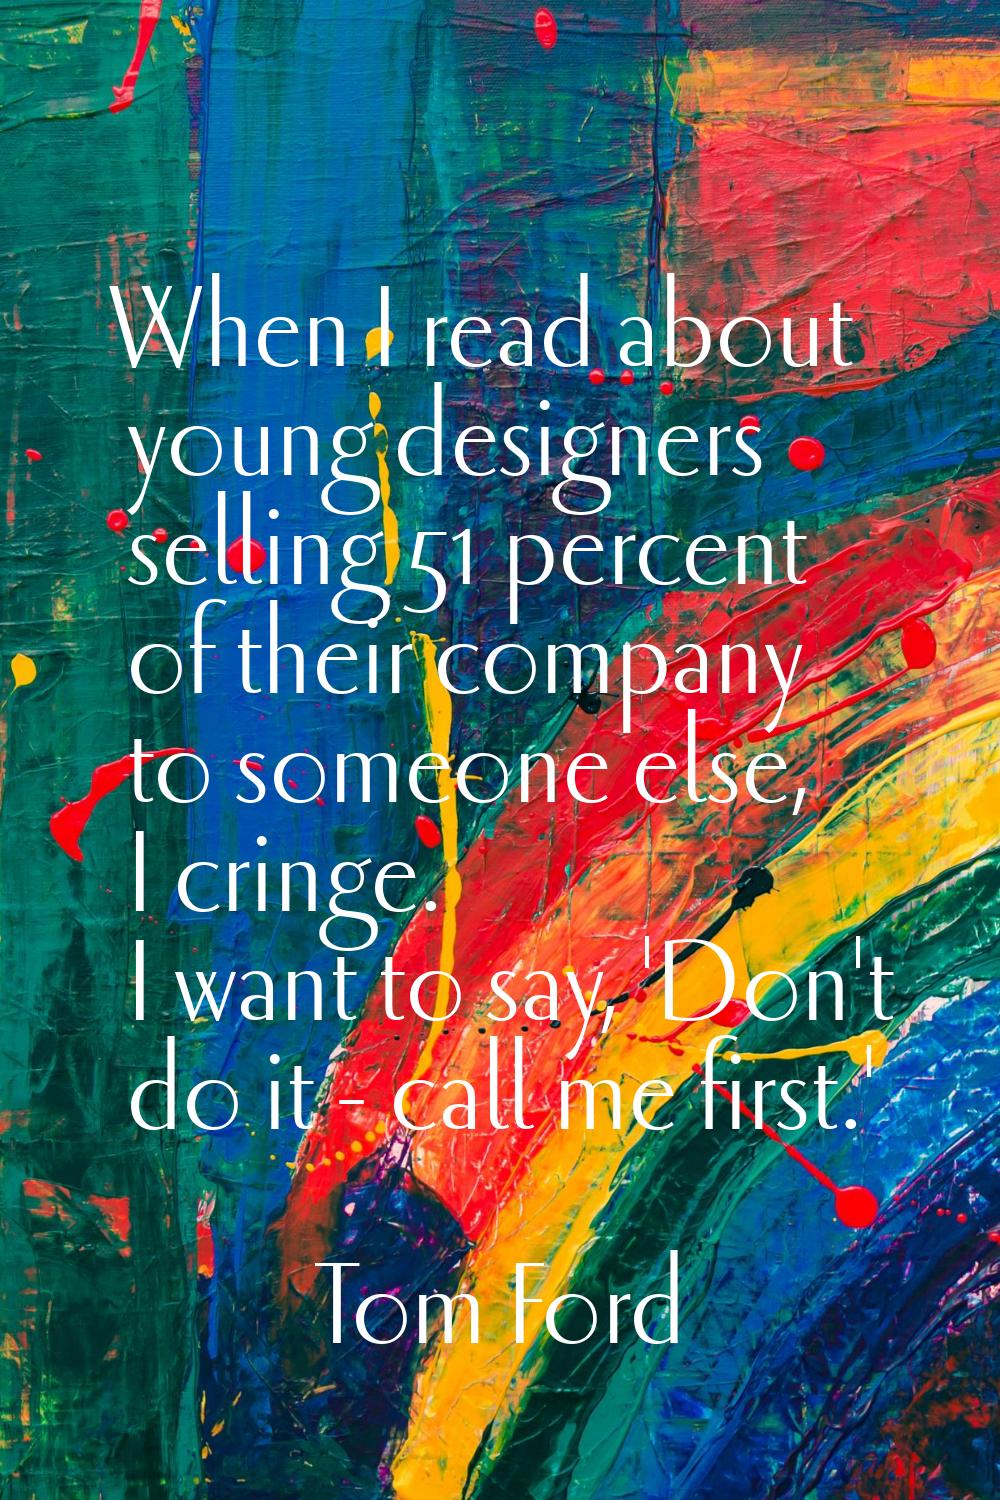 When I read about young designers selling 51 percent of their company to someone else, I cringe. I 